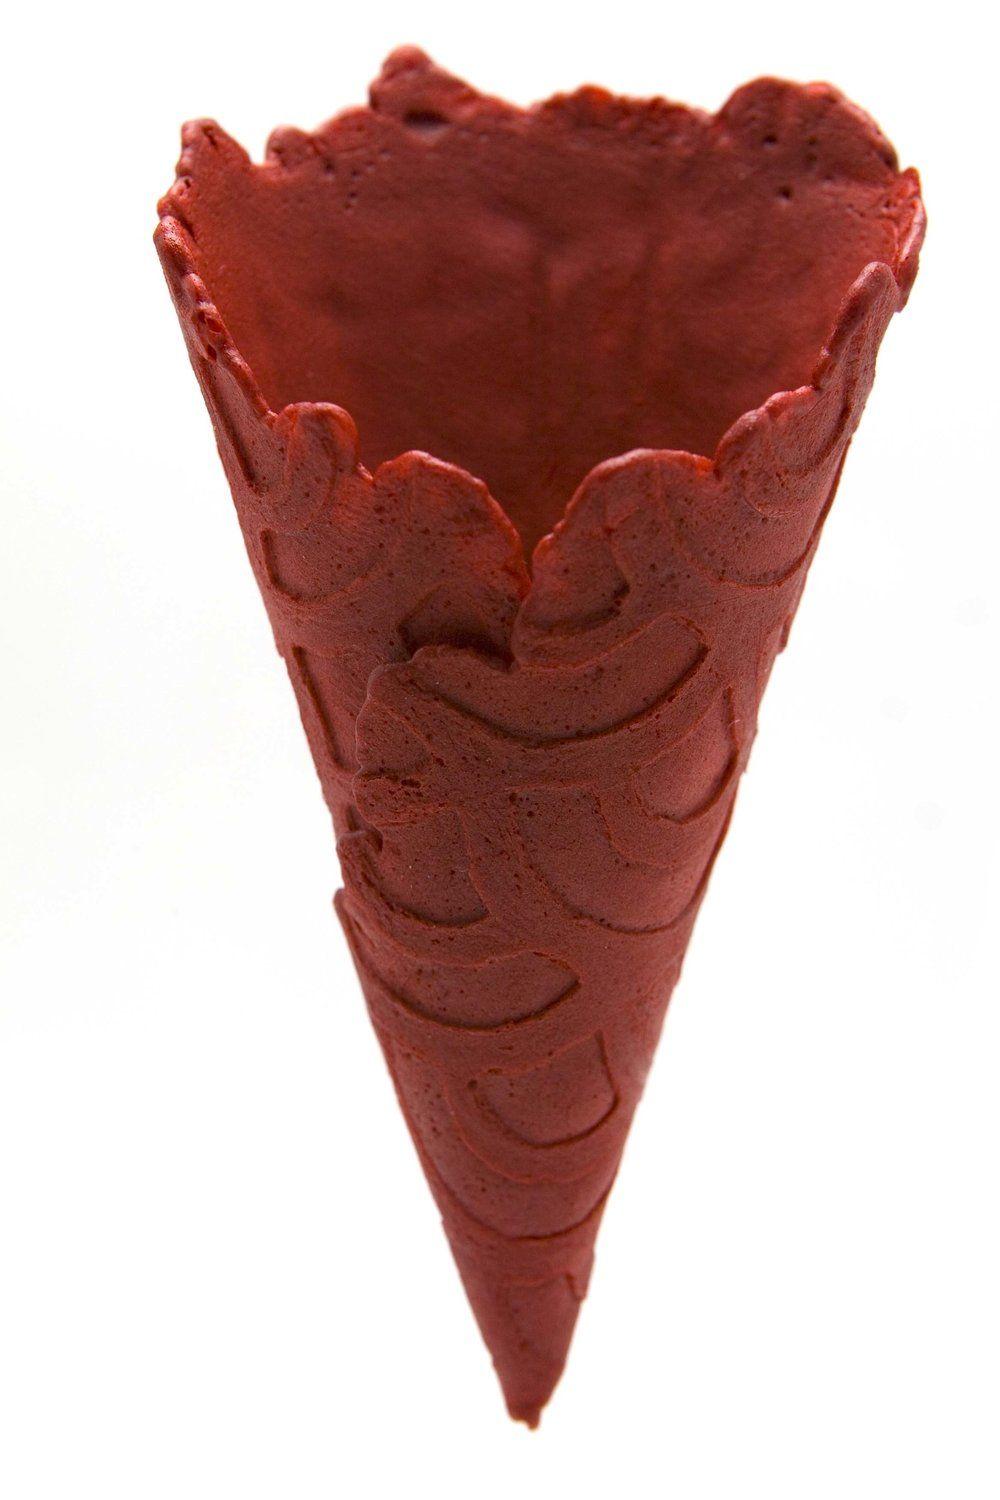 Red Ice Cream Cone Logo - Products — The Konery waffle cones the konery